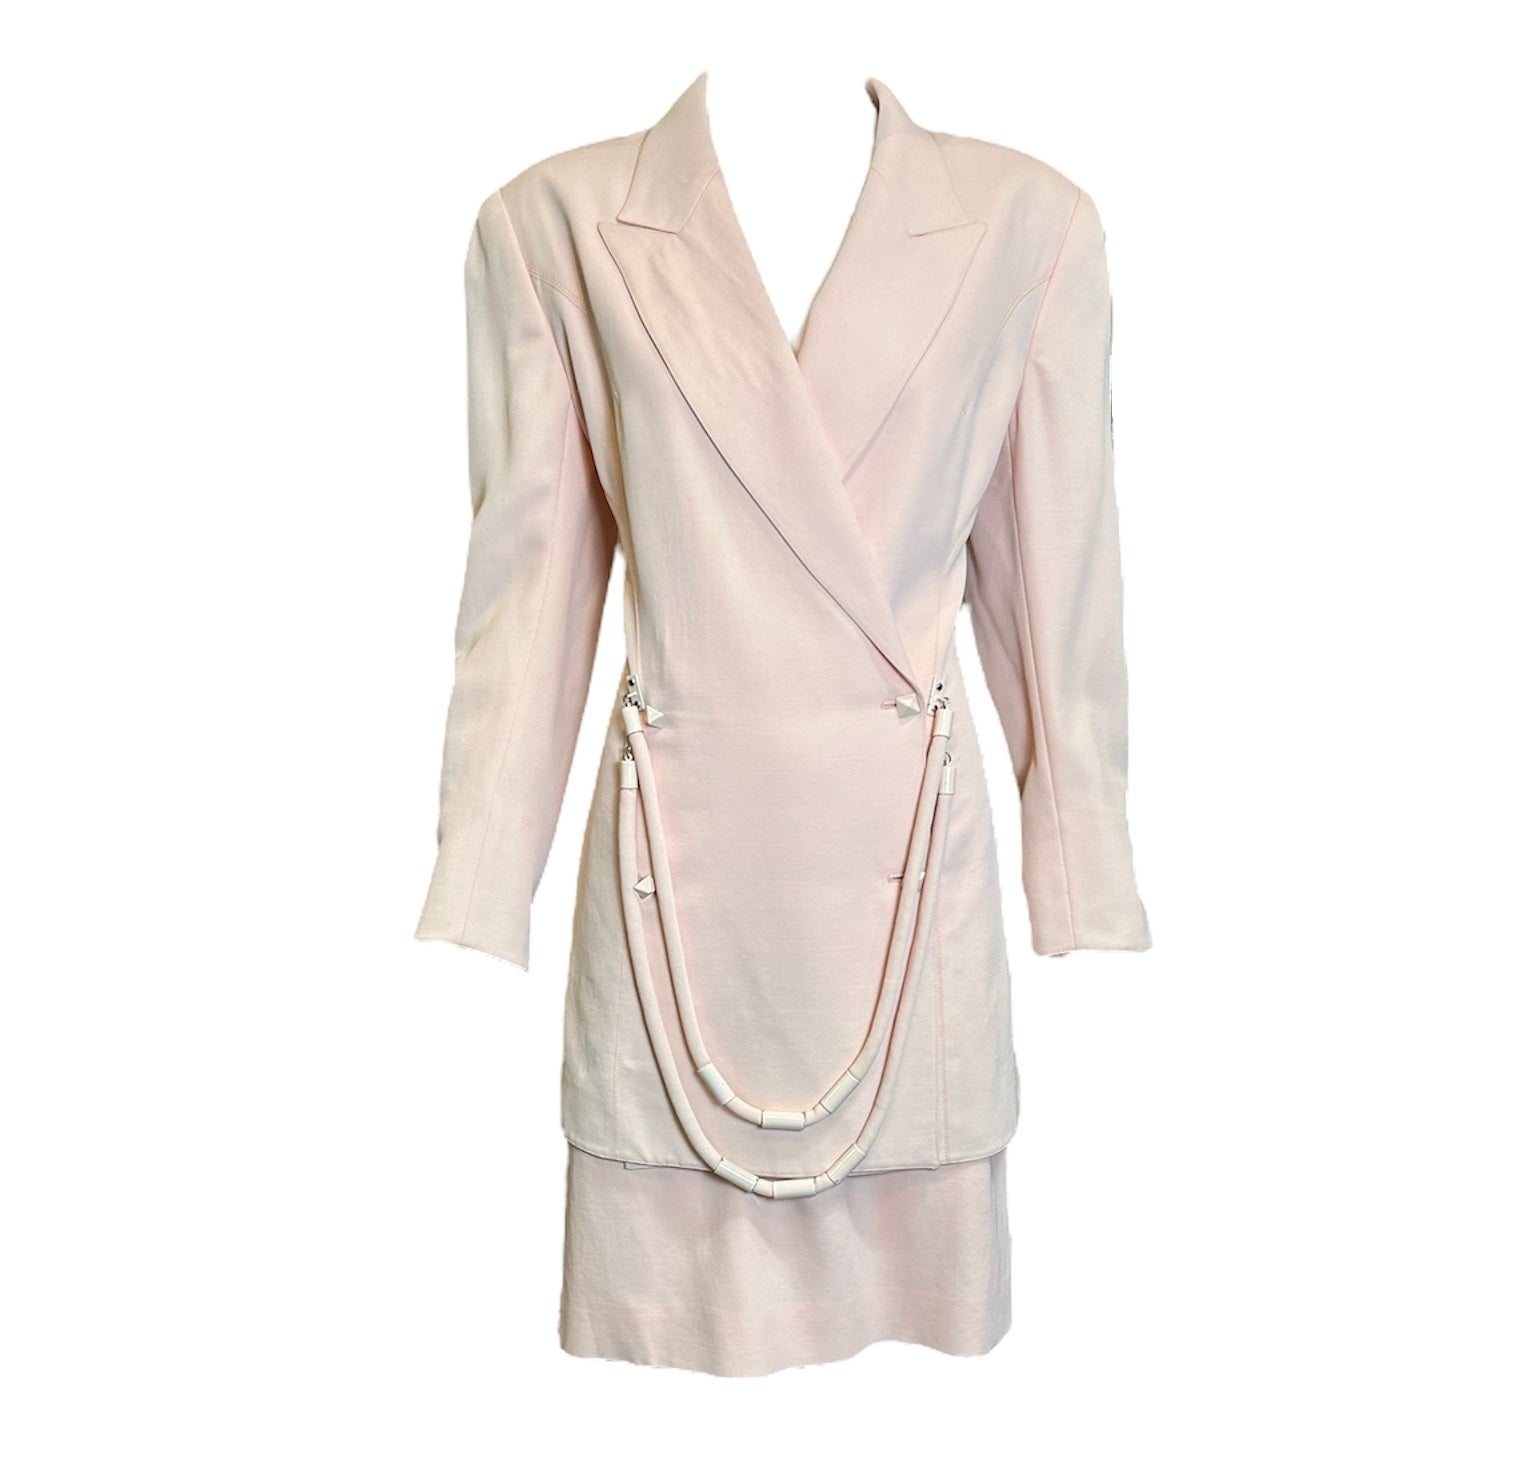 Montana 80s Powder Pink Suit Ensemble with Hardware Drape FRONT PHOTO 1 OF 6